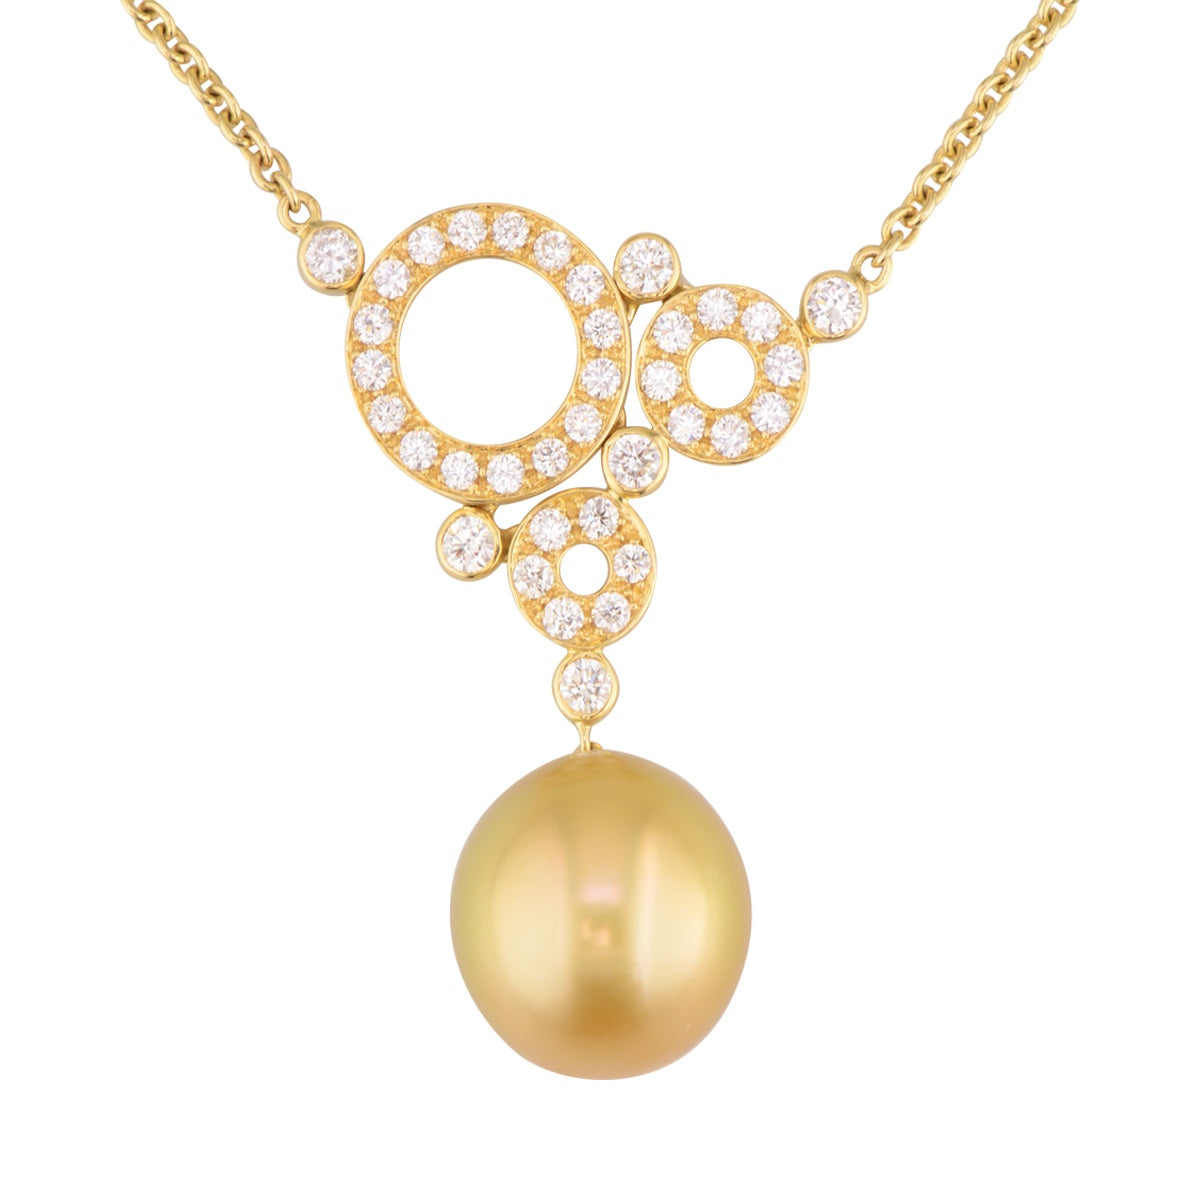 'Golden Swiss' diamond and golden pearl statement necklace. 